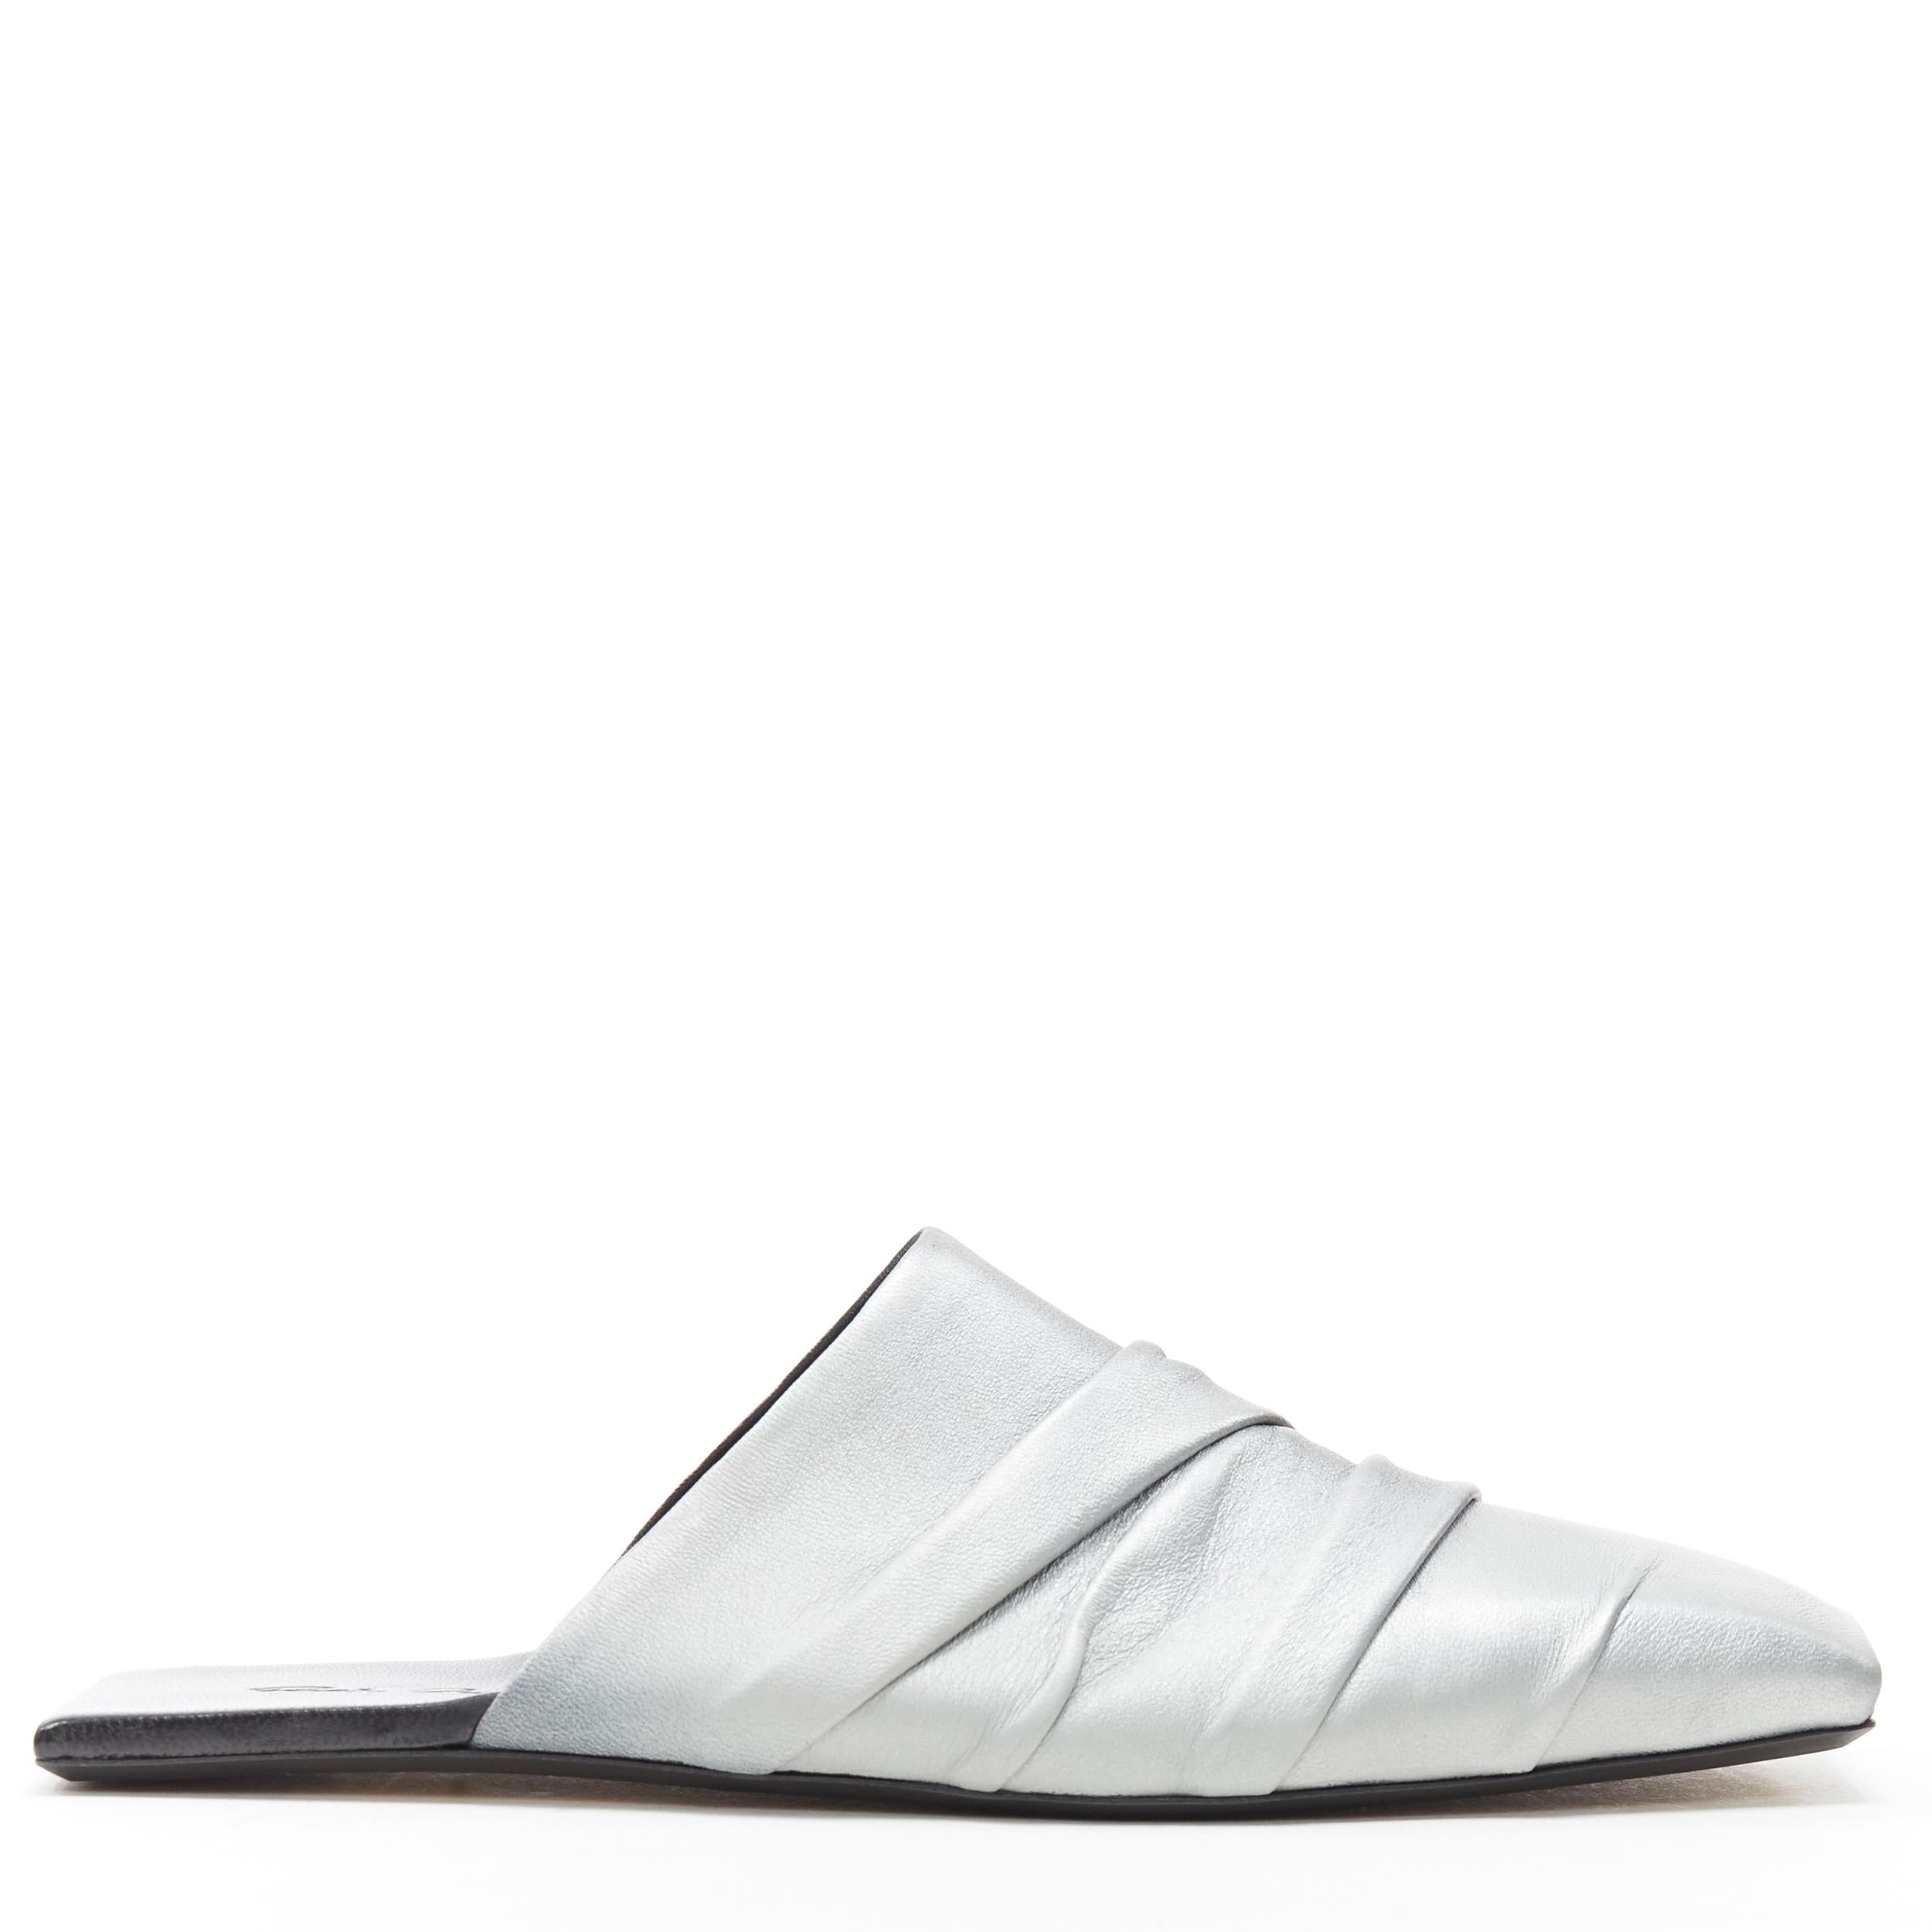 new RICK OWENS black silver painted leather draped square toe flats slipper EU37
Brand: Rick Owens
Designer: Rick Owens
Collection: Fall Winter 2018
Model Name / Style: Draped slippers
Material: Leather
Color: Black
Pattern: Solid
Closure: Slip